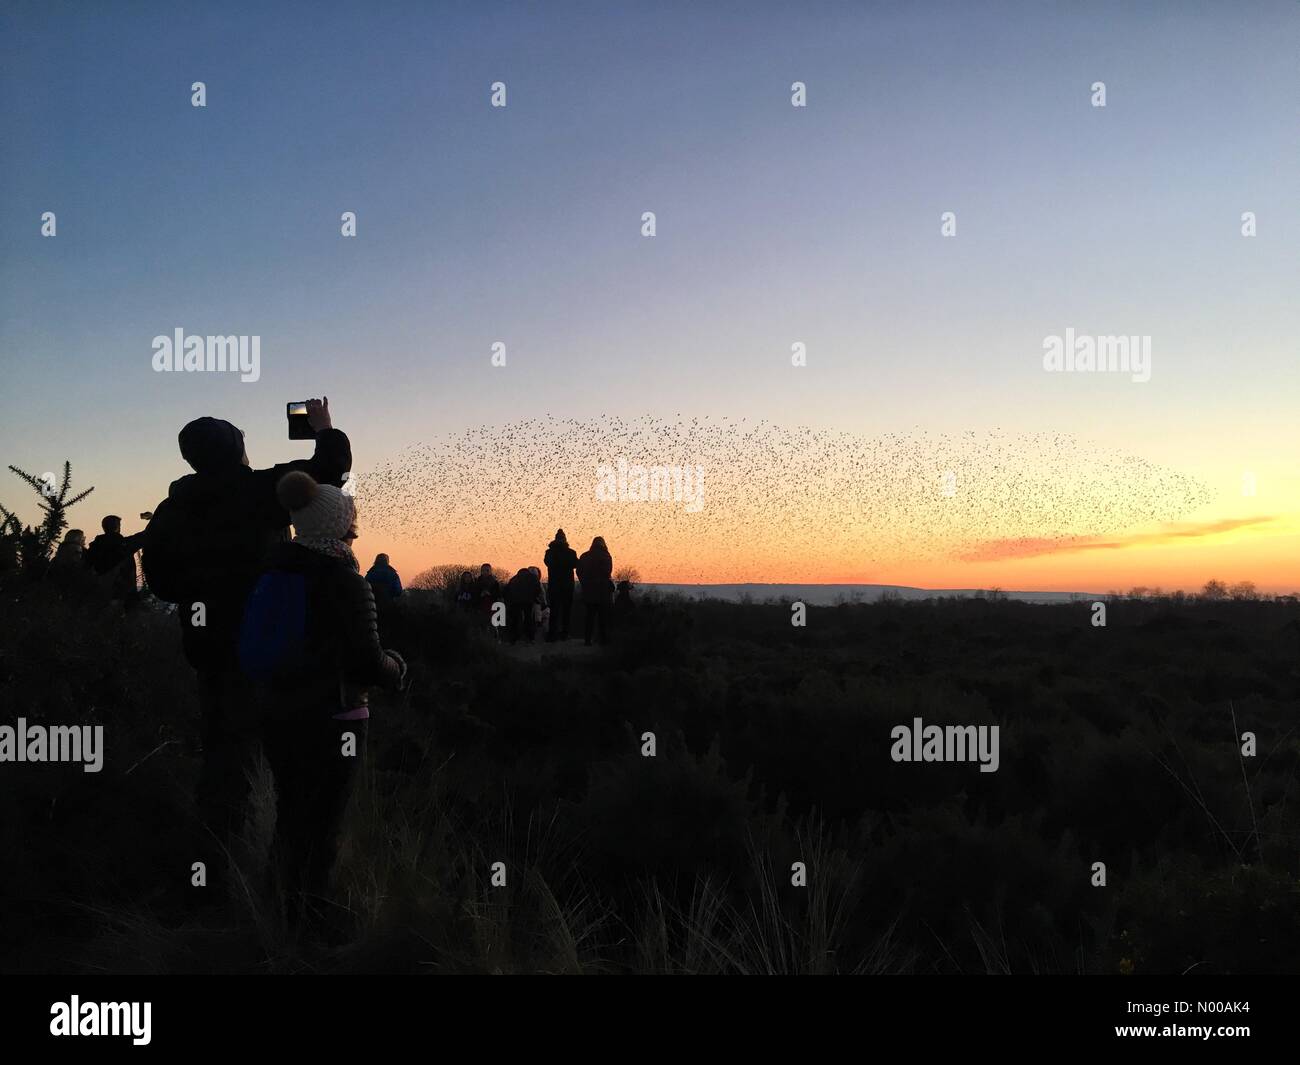 Studland, Dorset, UK. 22nd January, 2017. People watching starling murmuration at Studland, Dorset, January 2017. This year has brought one of the largest starling flocks, creating an amazing display each evening at dusk. Credit: Szekely Images / StockimoNews/Alamy Live News Stock Photo